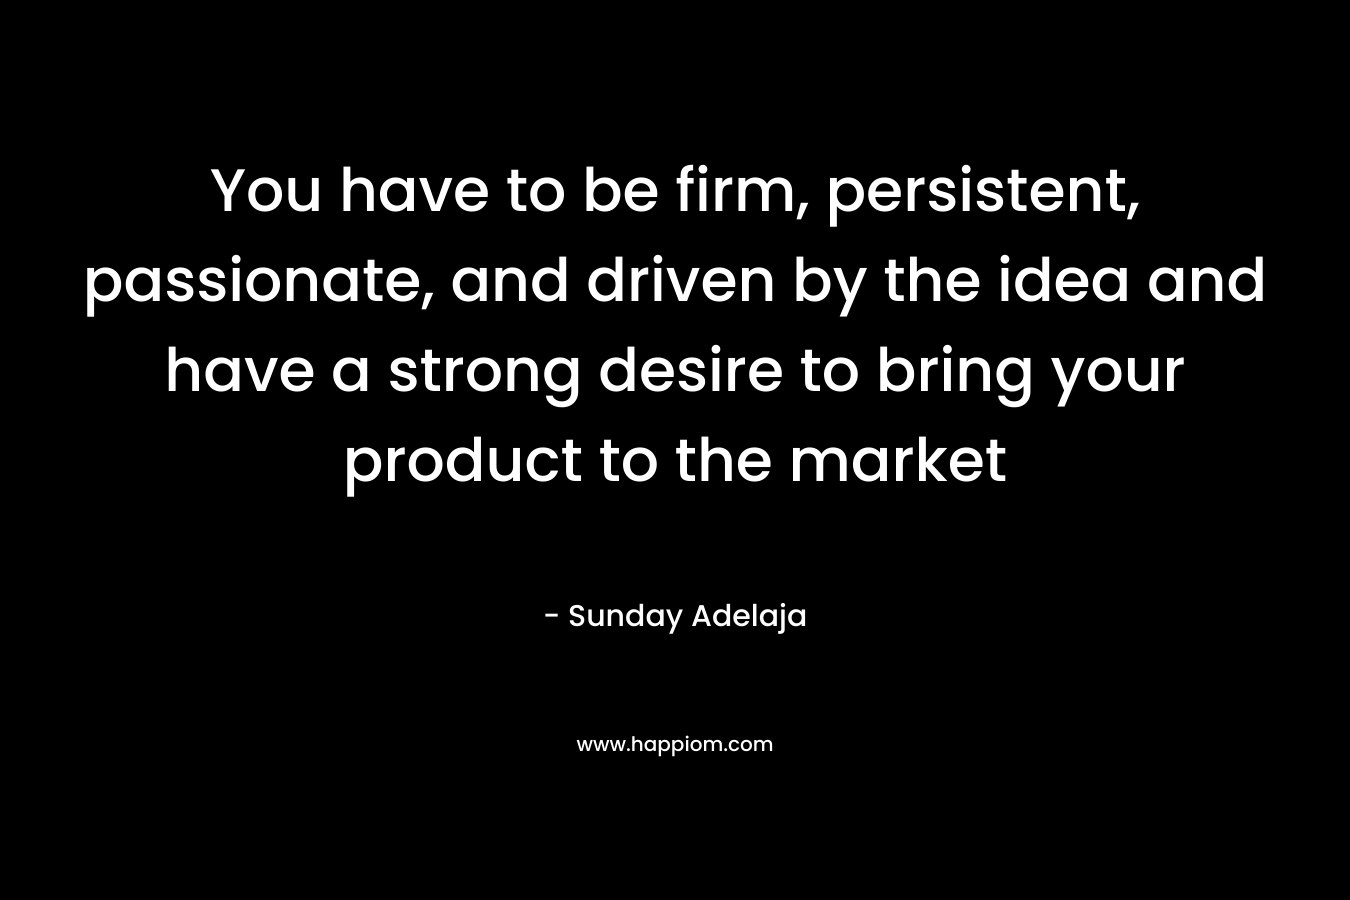 You have to be firm, persistent, passionate, and driven by the idea and have a strong desire to bring your product to the market